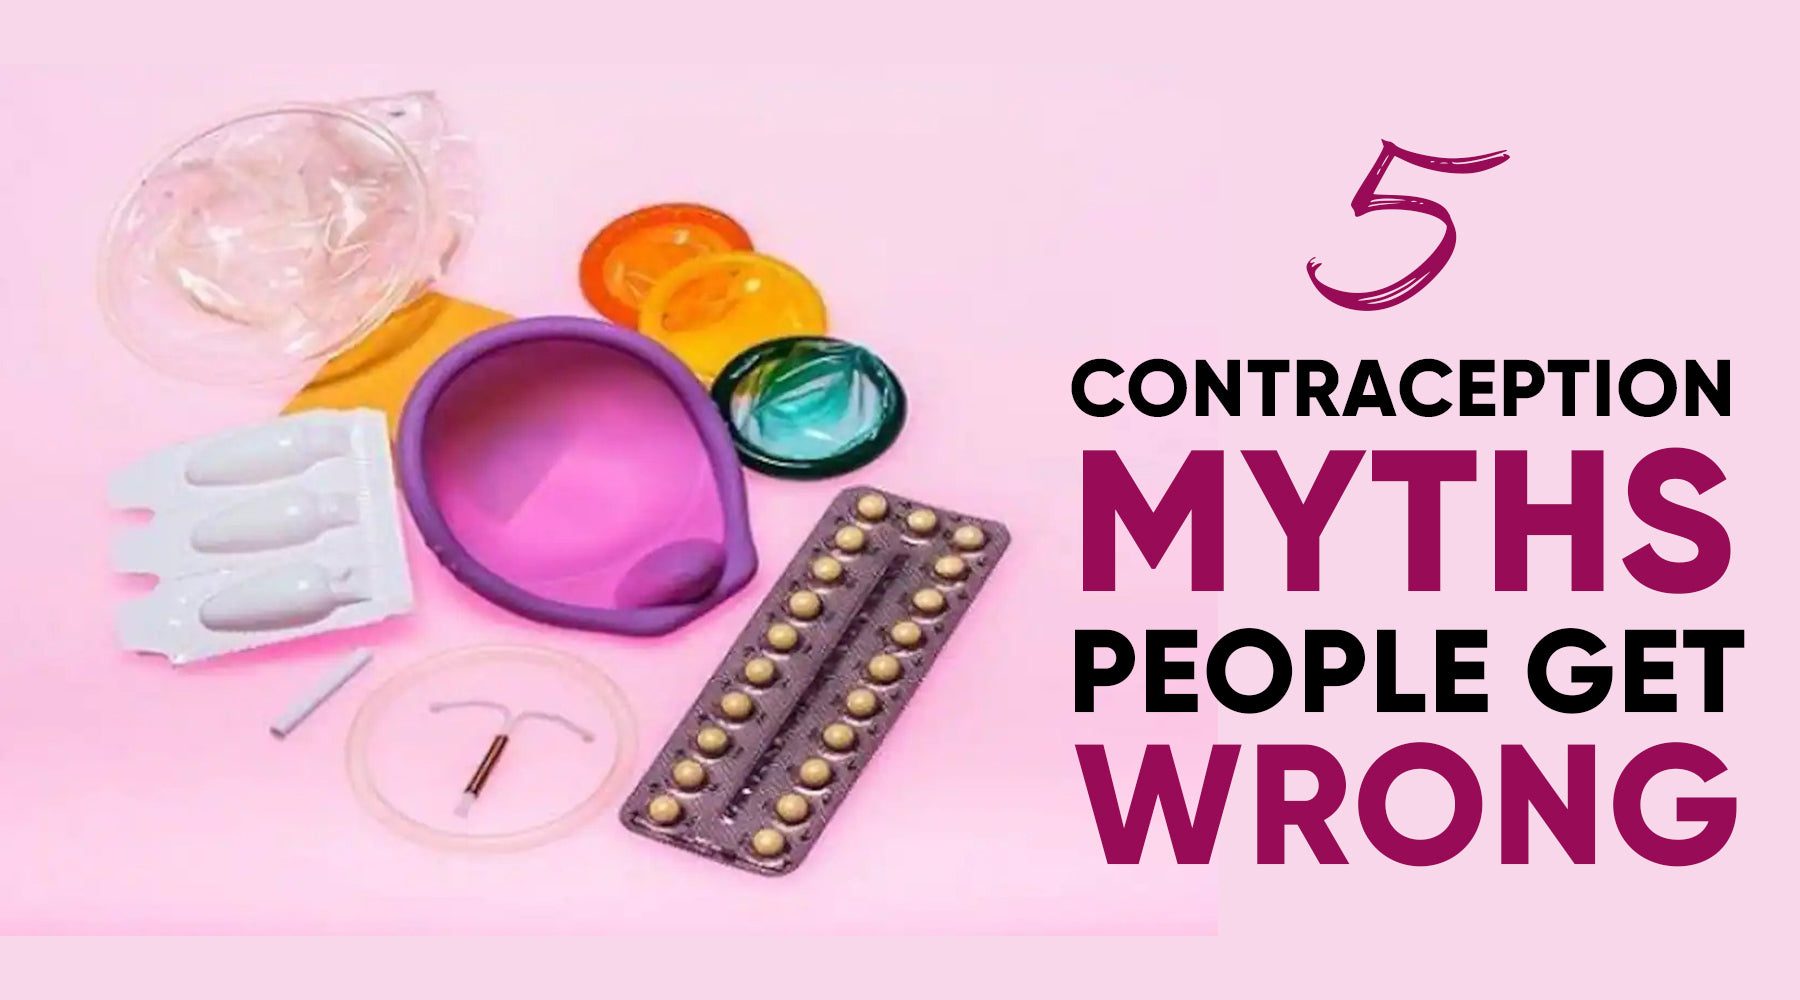 5 CONTRACEPTION MYTHS PEOPLE GET WRONG